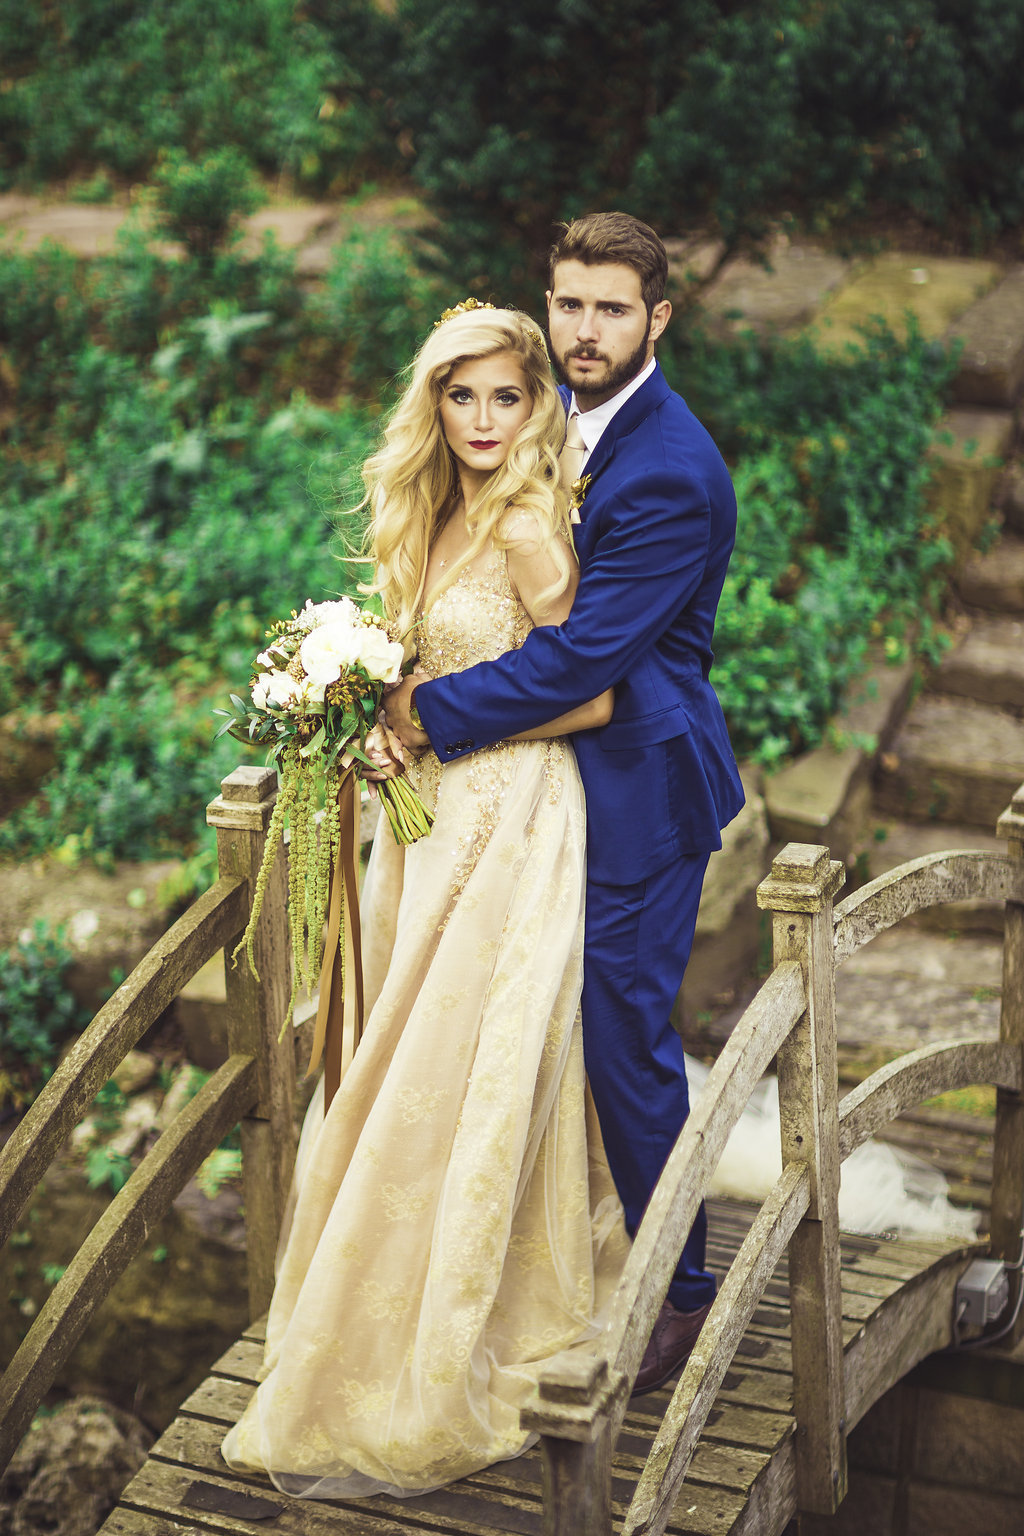 Wedding Photograph Of Bride in Peach Dress and Groom in Blue Suit Posing for a Camera Shot Los Angeles